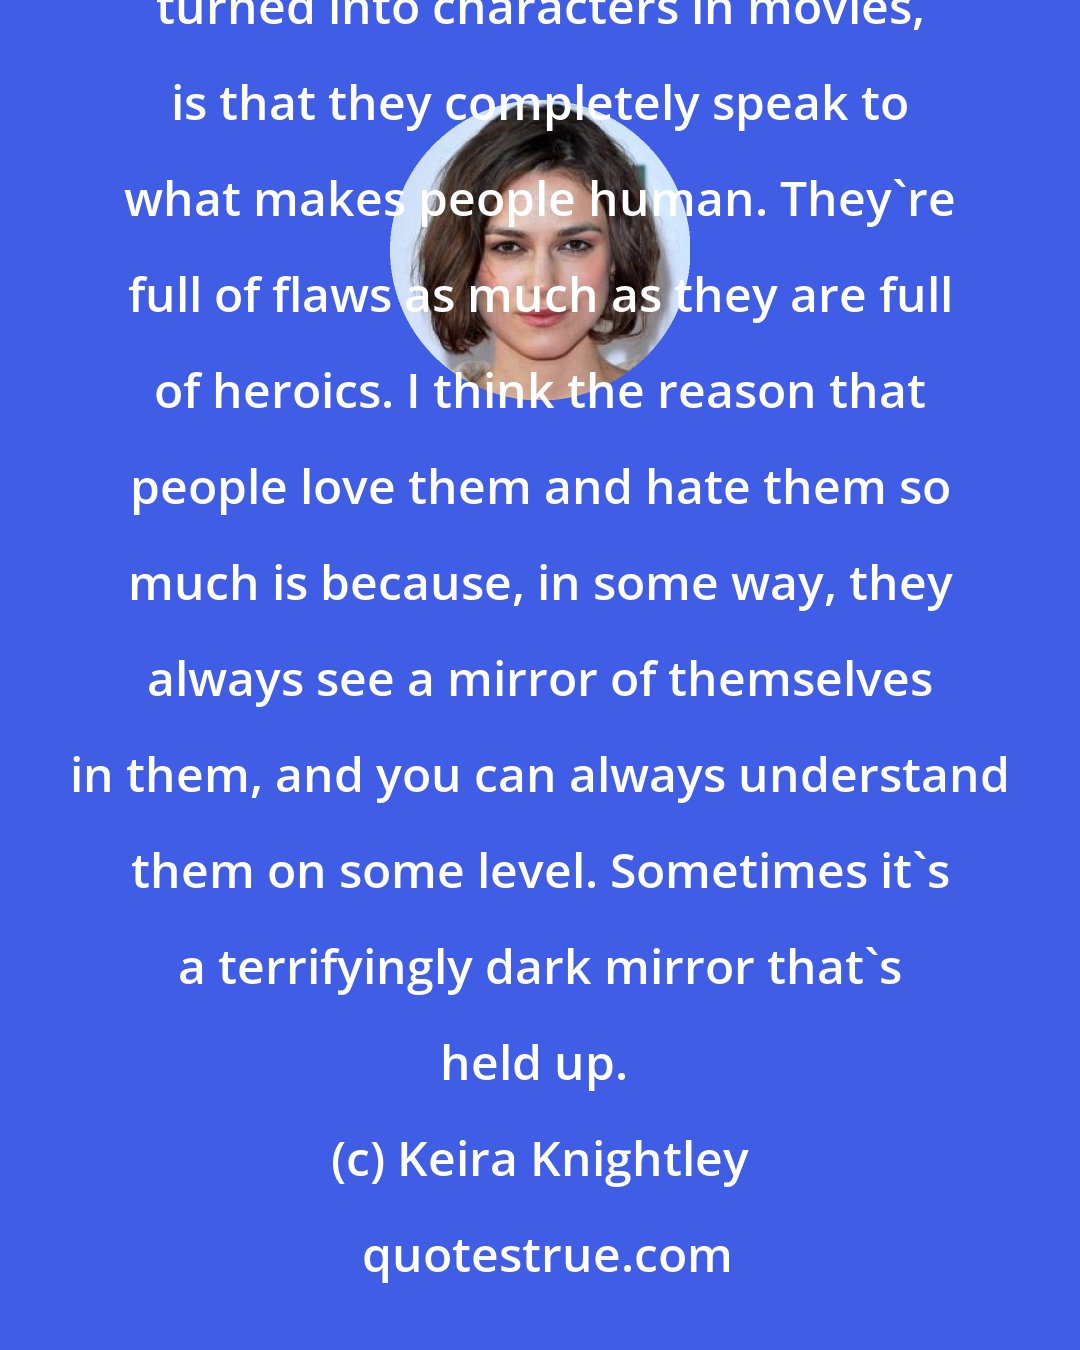 Keira Knightley: The thing about great fictional characters from literature, and the reason that they're constantly turned into characters in movies, is that they completely speak to what makes people human. They're full of flaws as much as they are full of heroics. I think the reason that people love them and hate them so much is because, in some way, they always see a mirror of themselves in them, and you can always understand them on some level. Sometimes it's a terrifyingly dark mirror that's held up. 